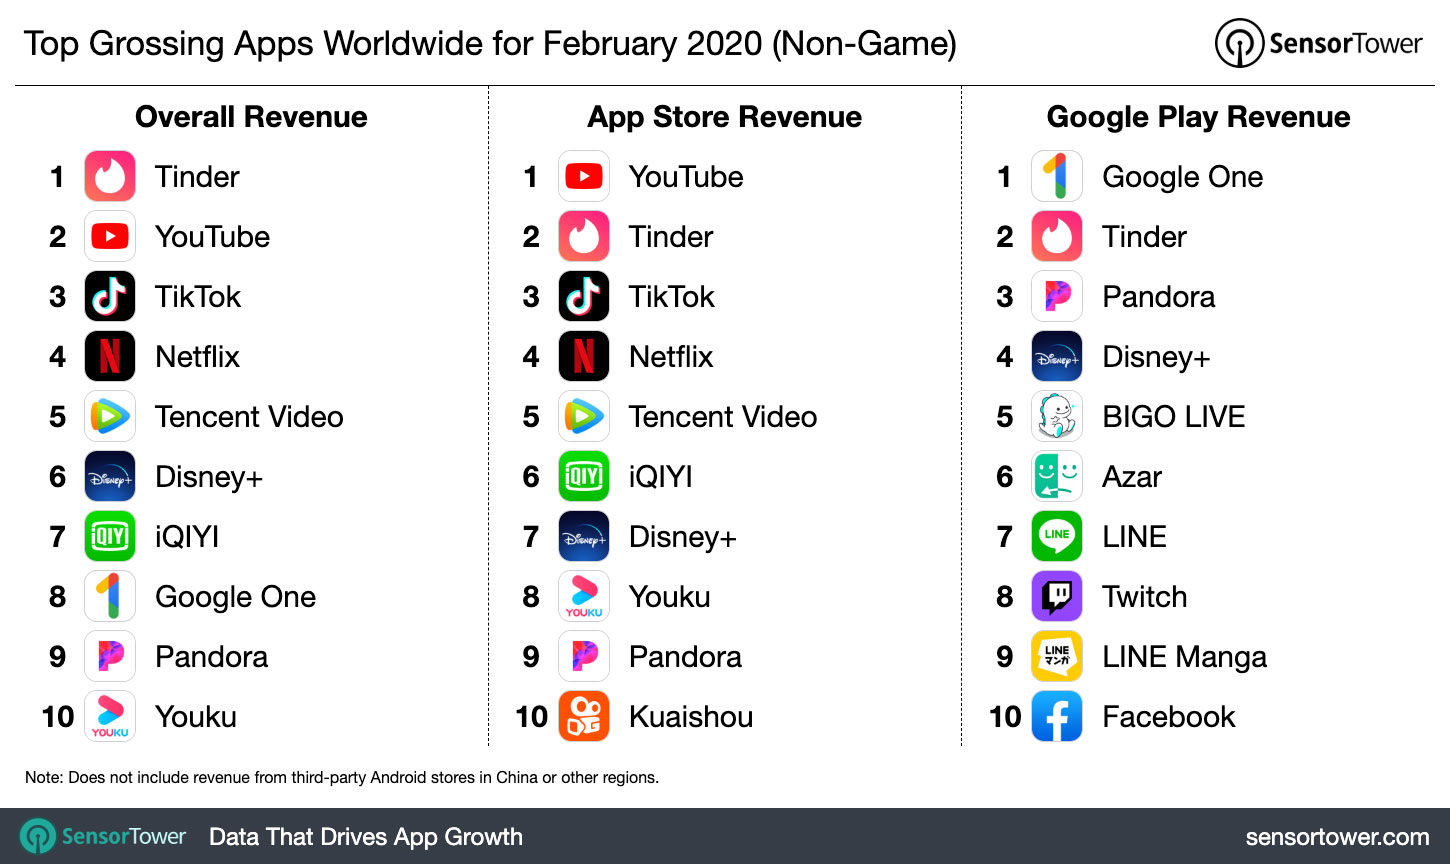 Top Grossing Apps Worldwide for February 2020